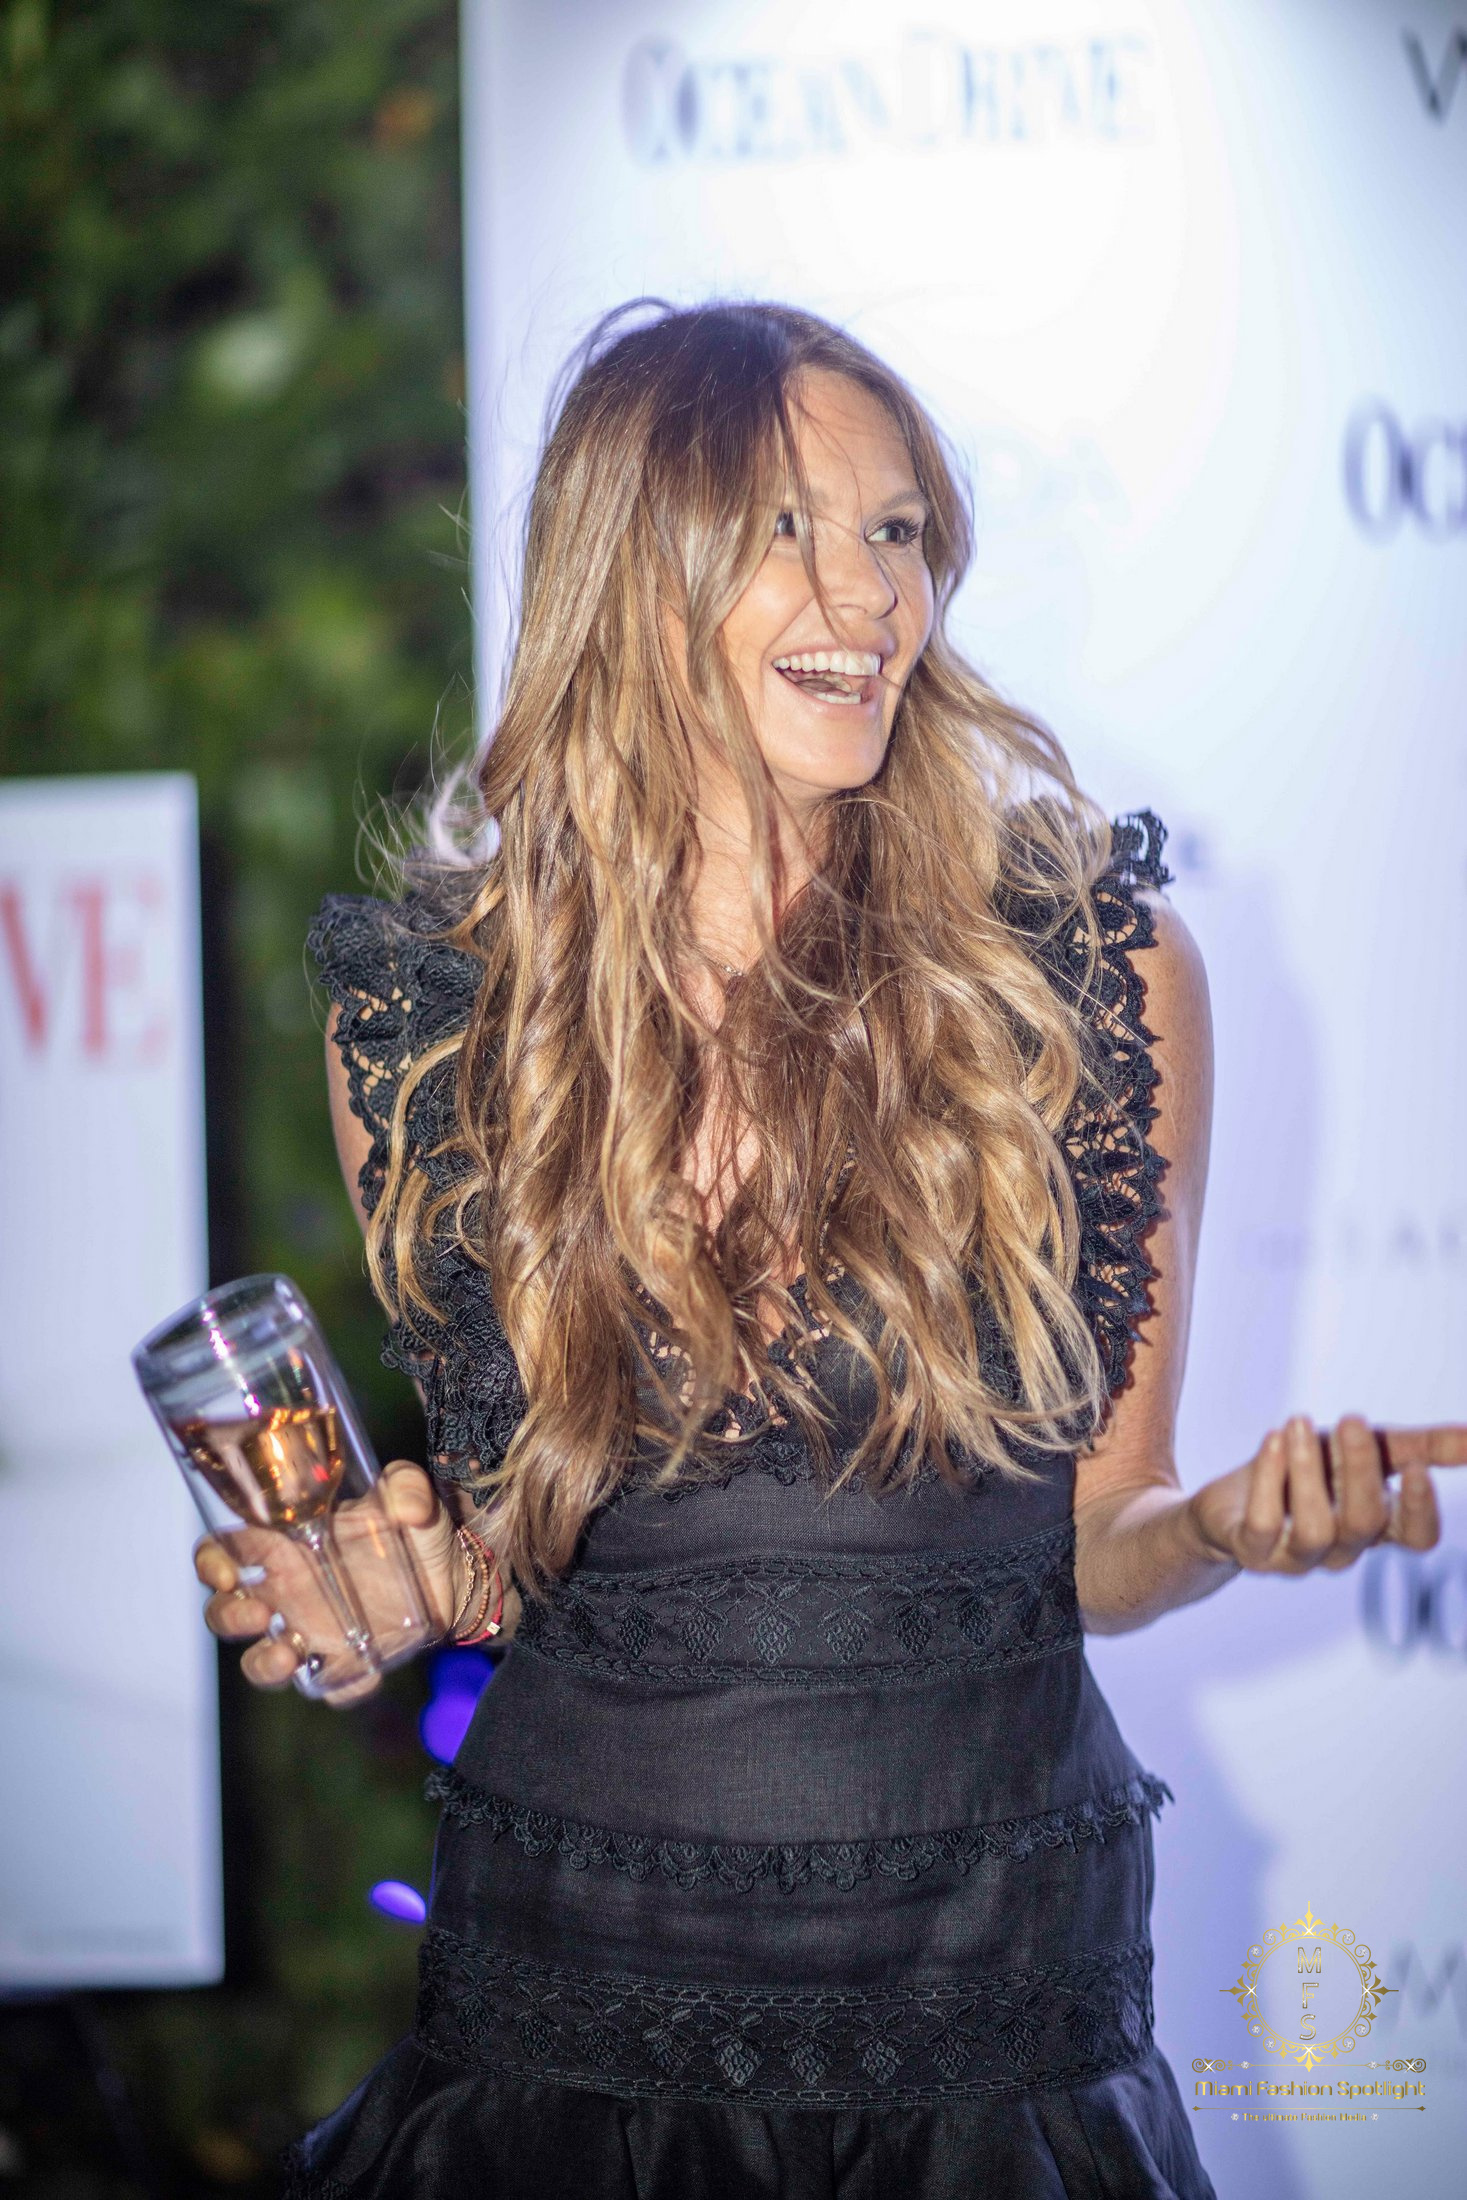 Ocean drive Magazine celebrates its first issue of 2019 with cover star Elle Macpherson